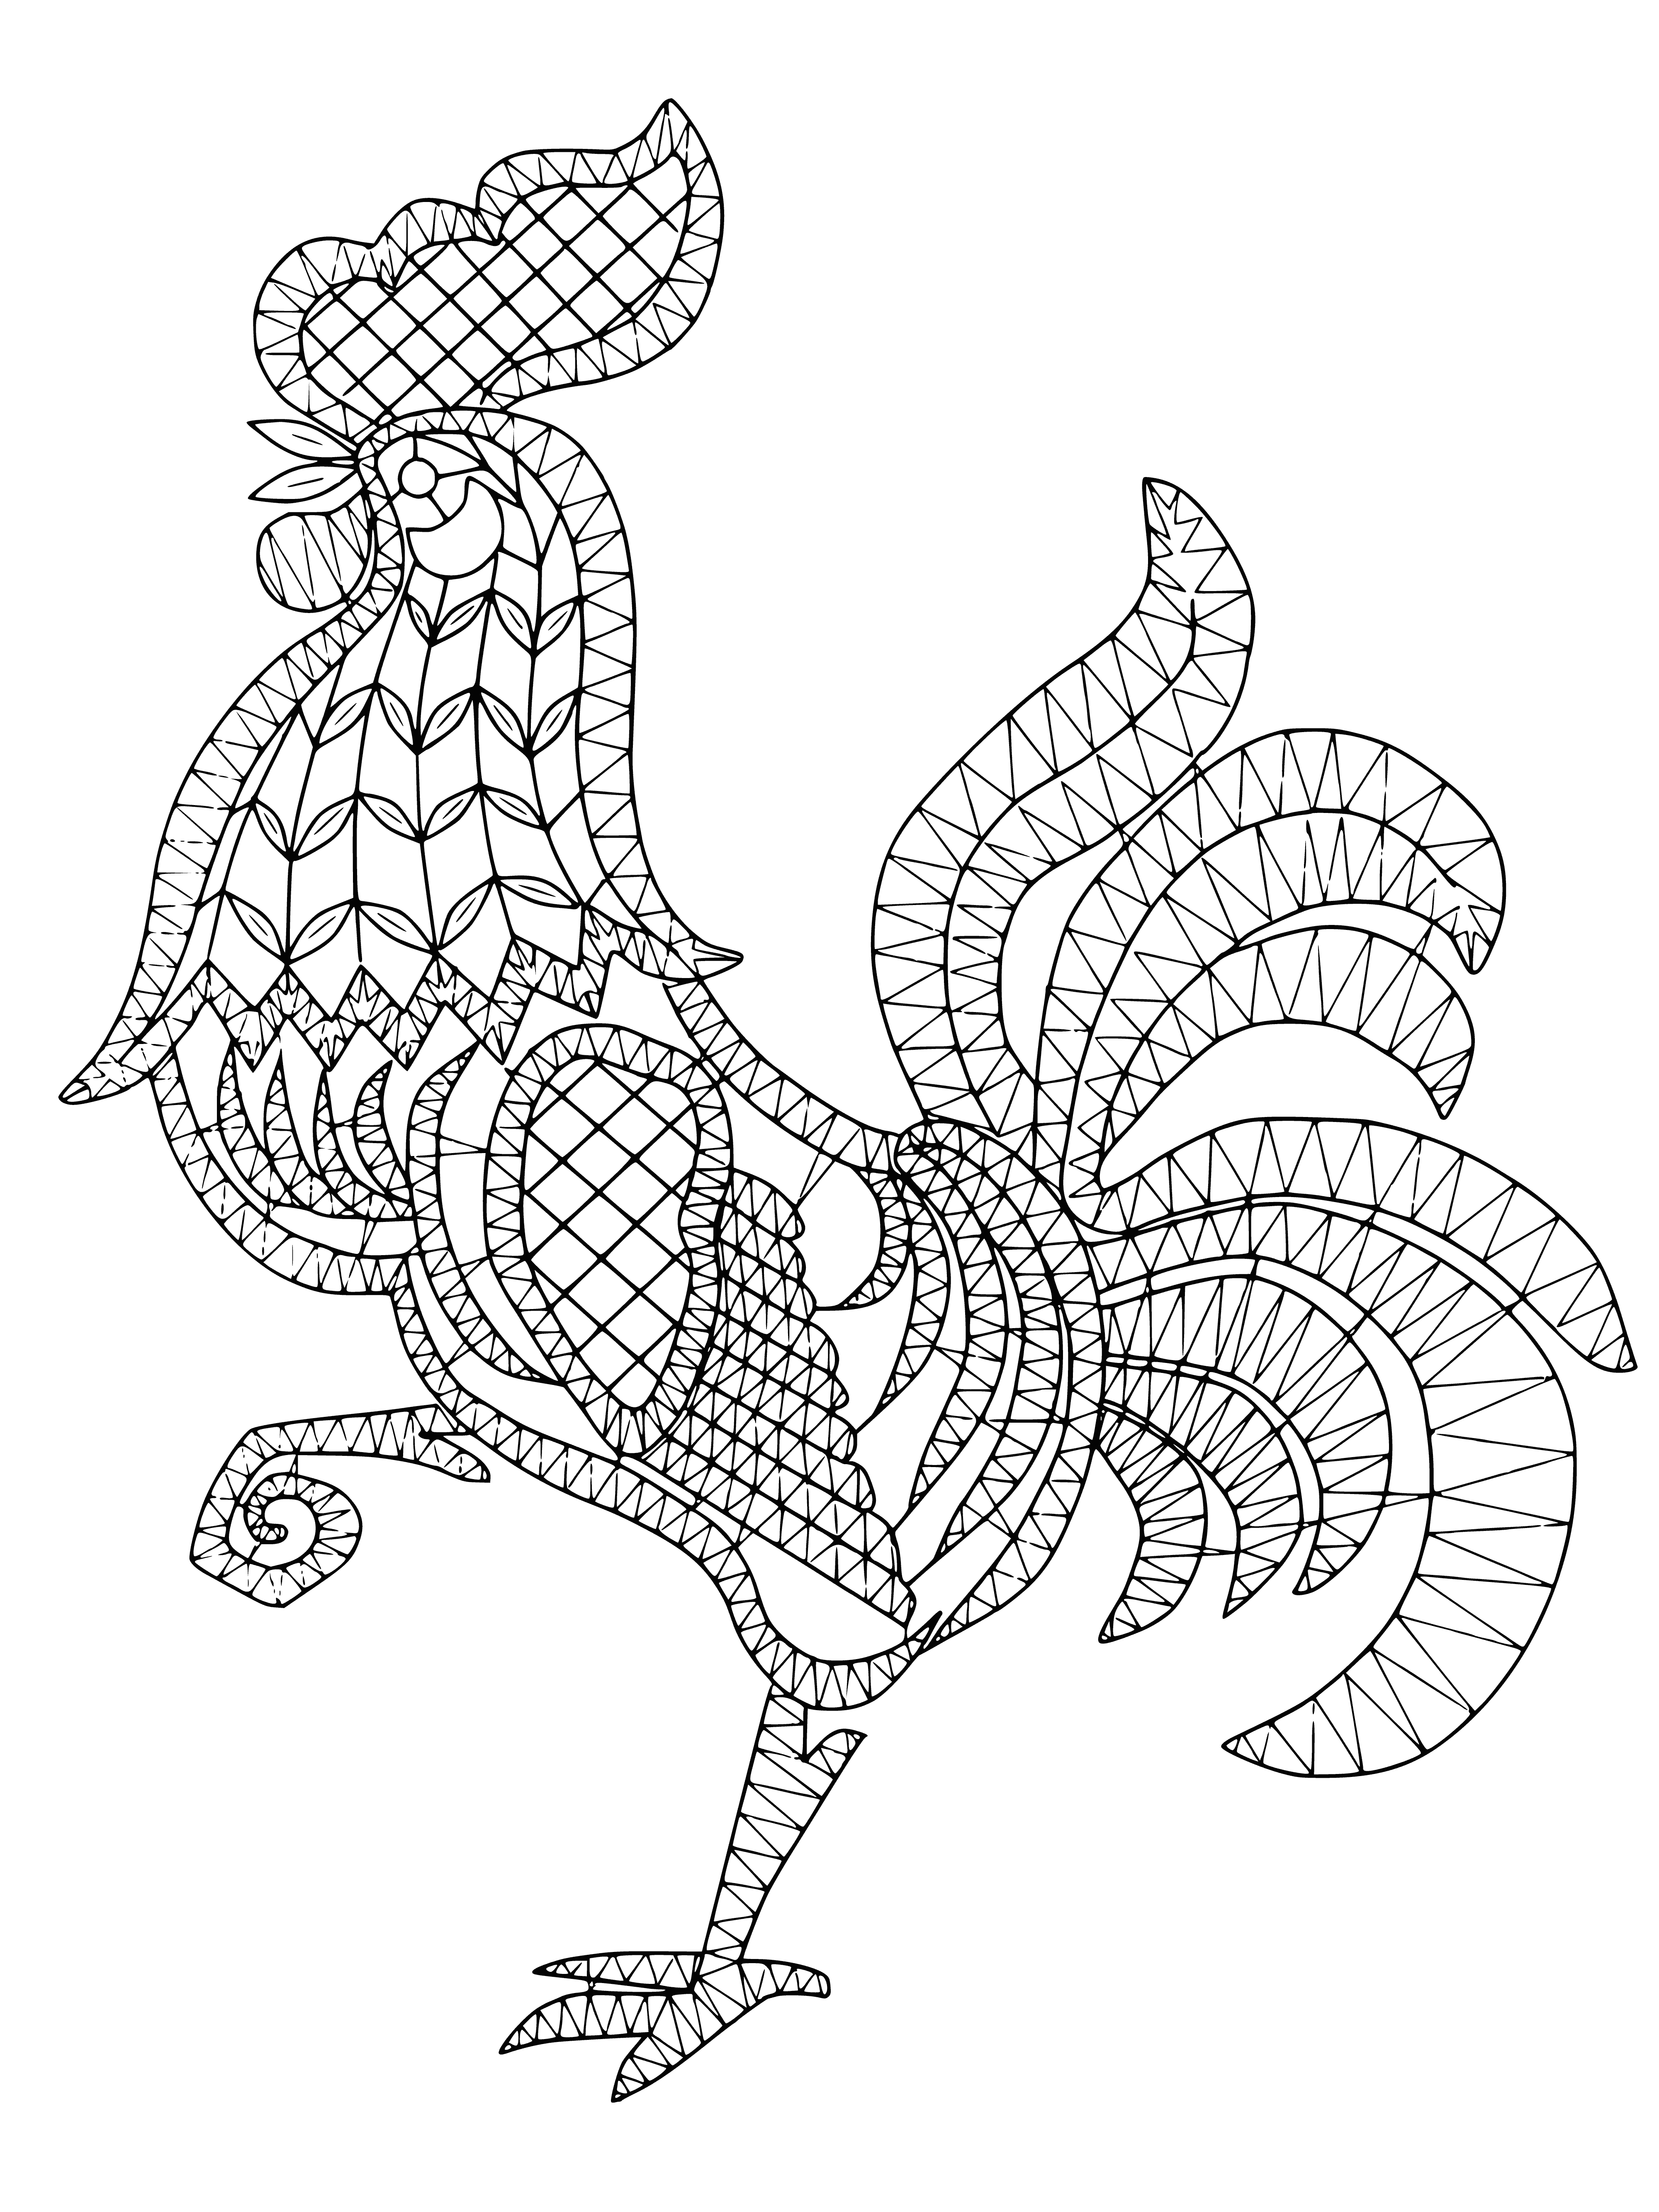 coloring page: Rooster staring at the camera, red and white feathers, crown, long tail.